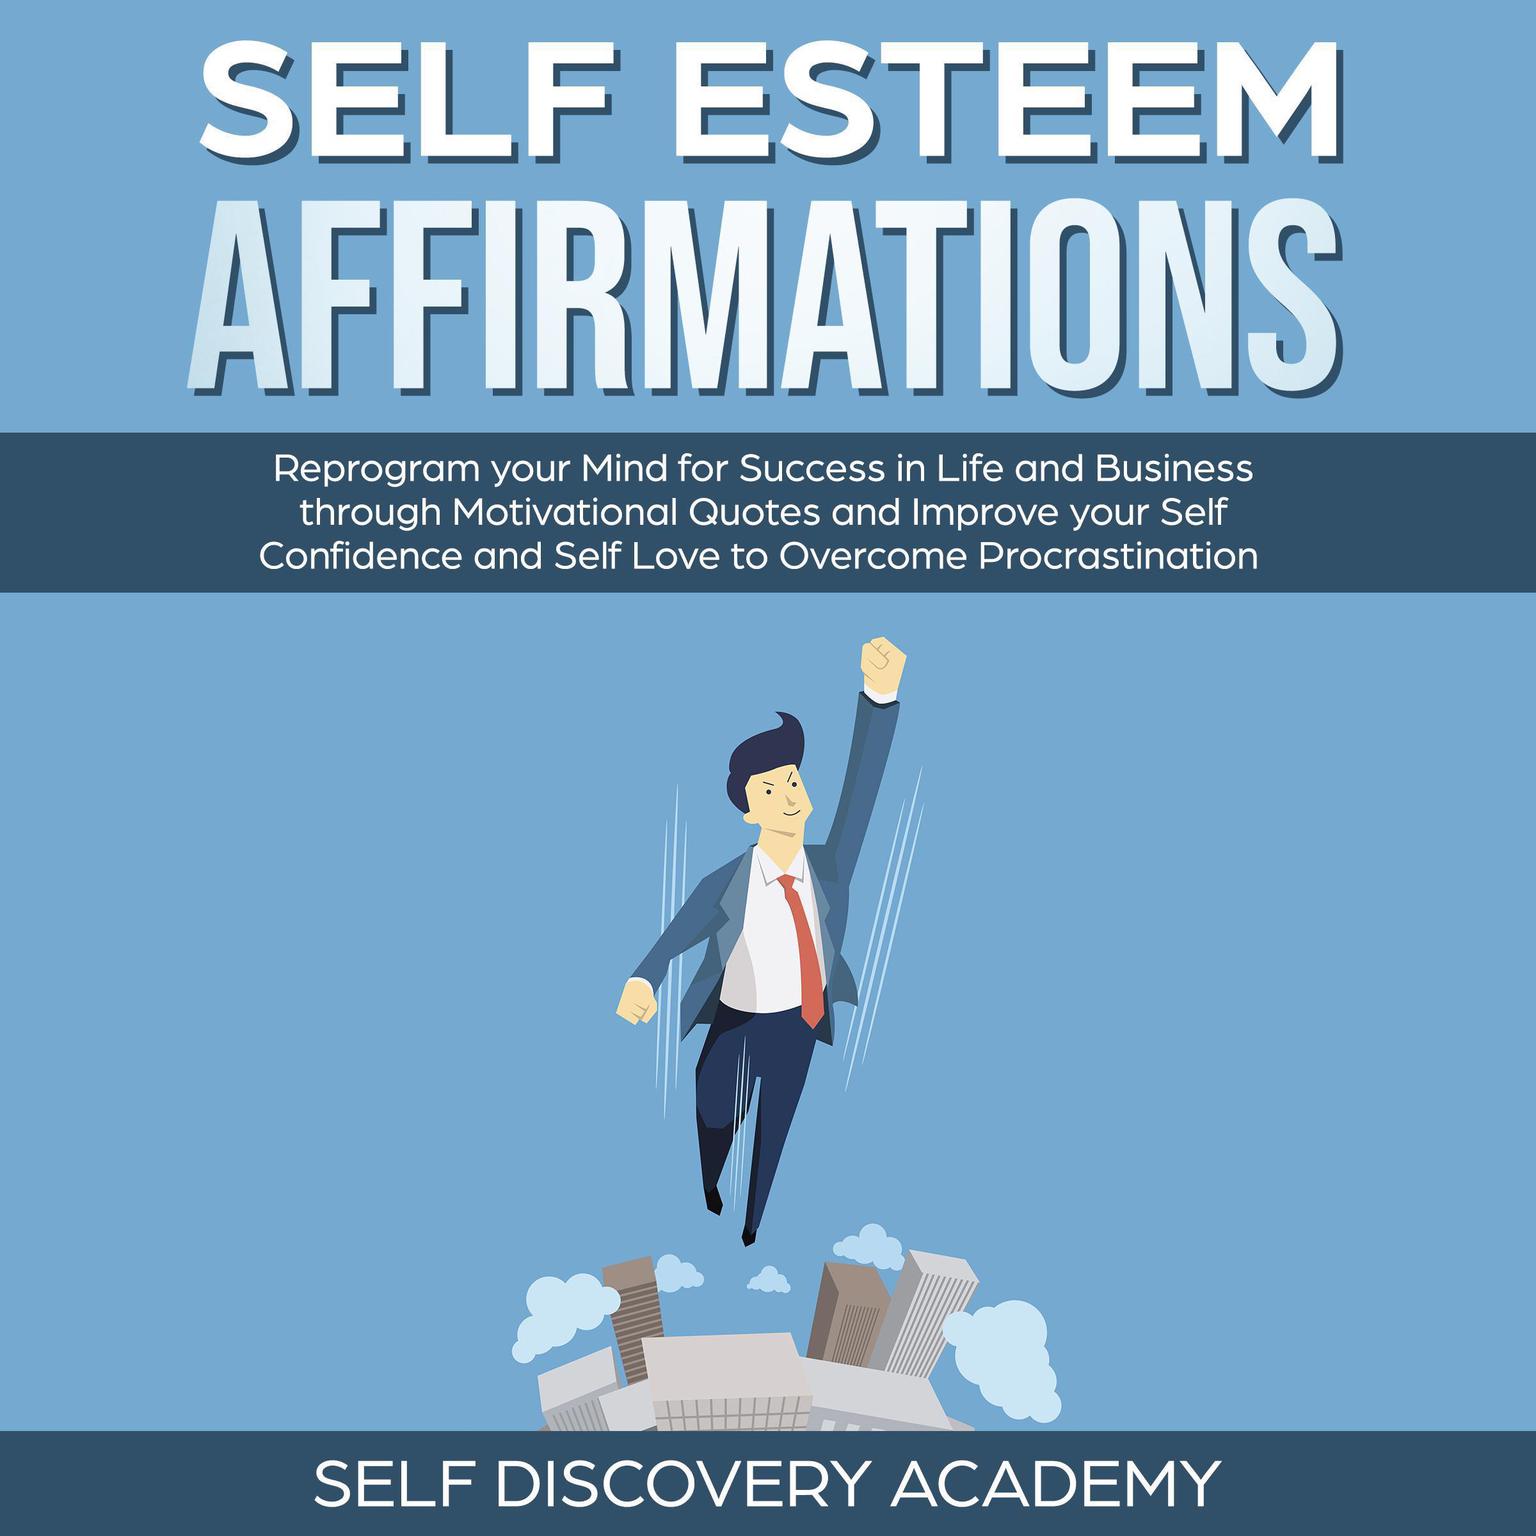 Self Esteem Affirmations (Abridged): Reprogram your Mind for Success in Life and Business through Motivational Quotes and Improve your Self Confidence and Self Love to overcome Procrastination Audiobook, by Self Discovery Academy